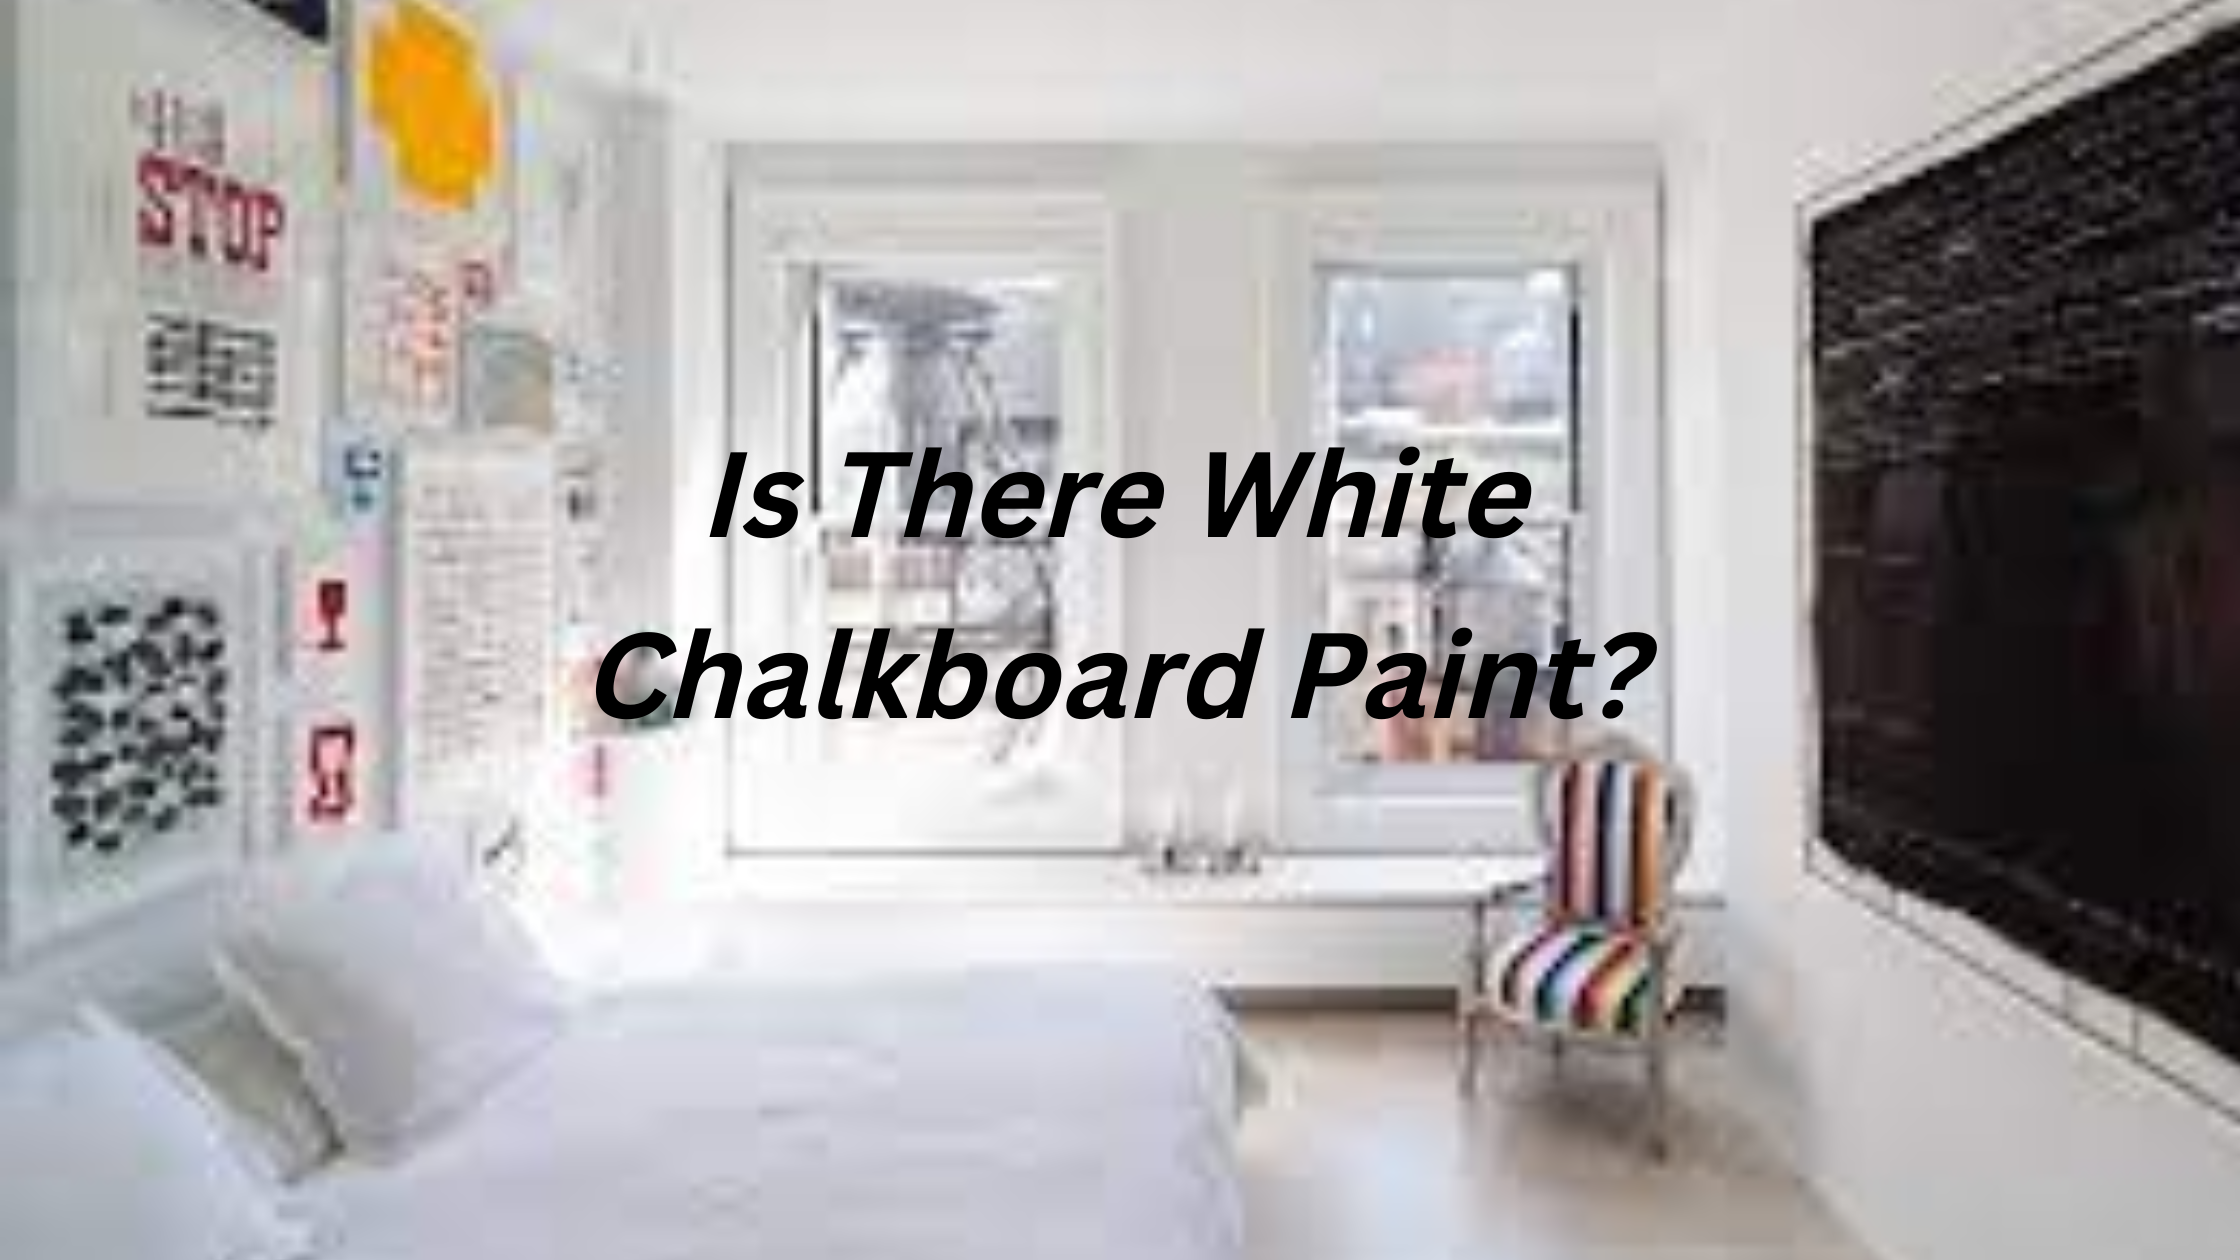 Is There White Chalkboard Paint?